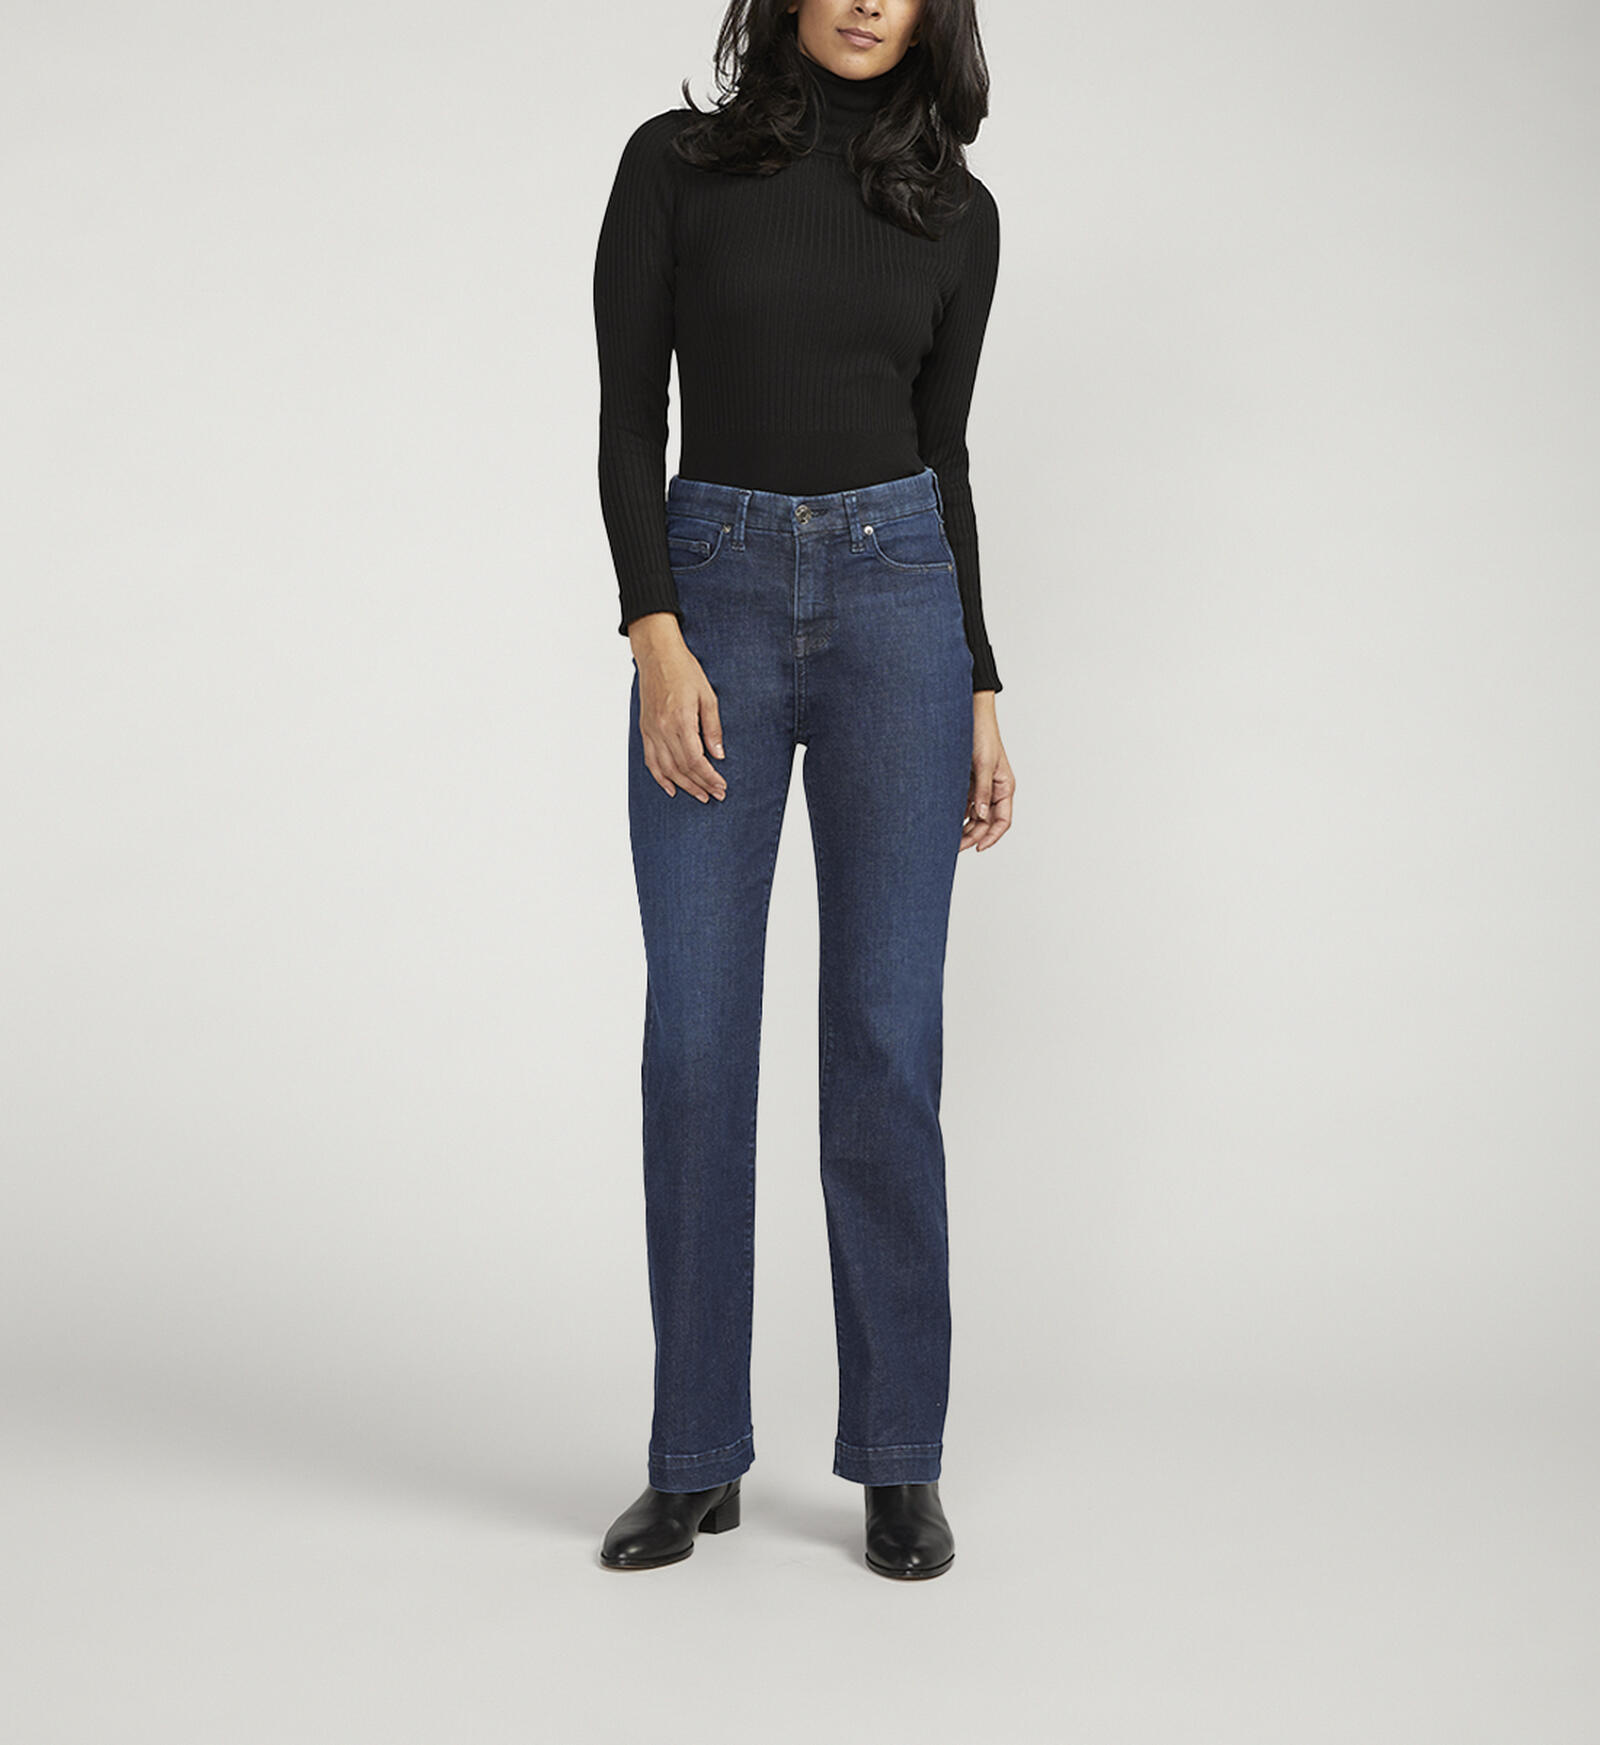 Buy Phoebe High Rise Bootcut Jeans for CAD 67.00